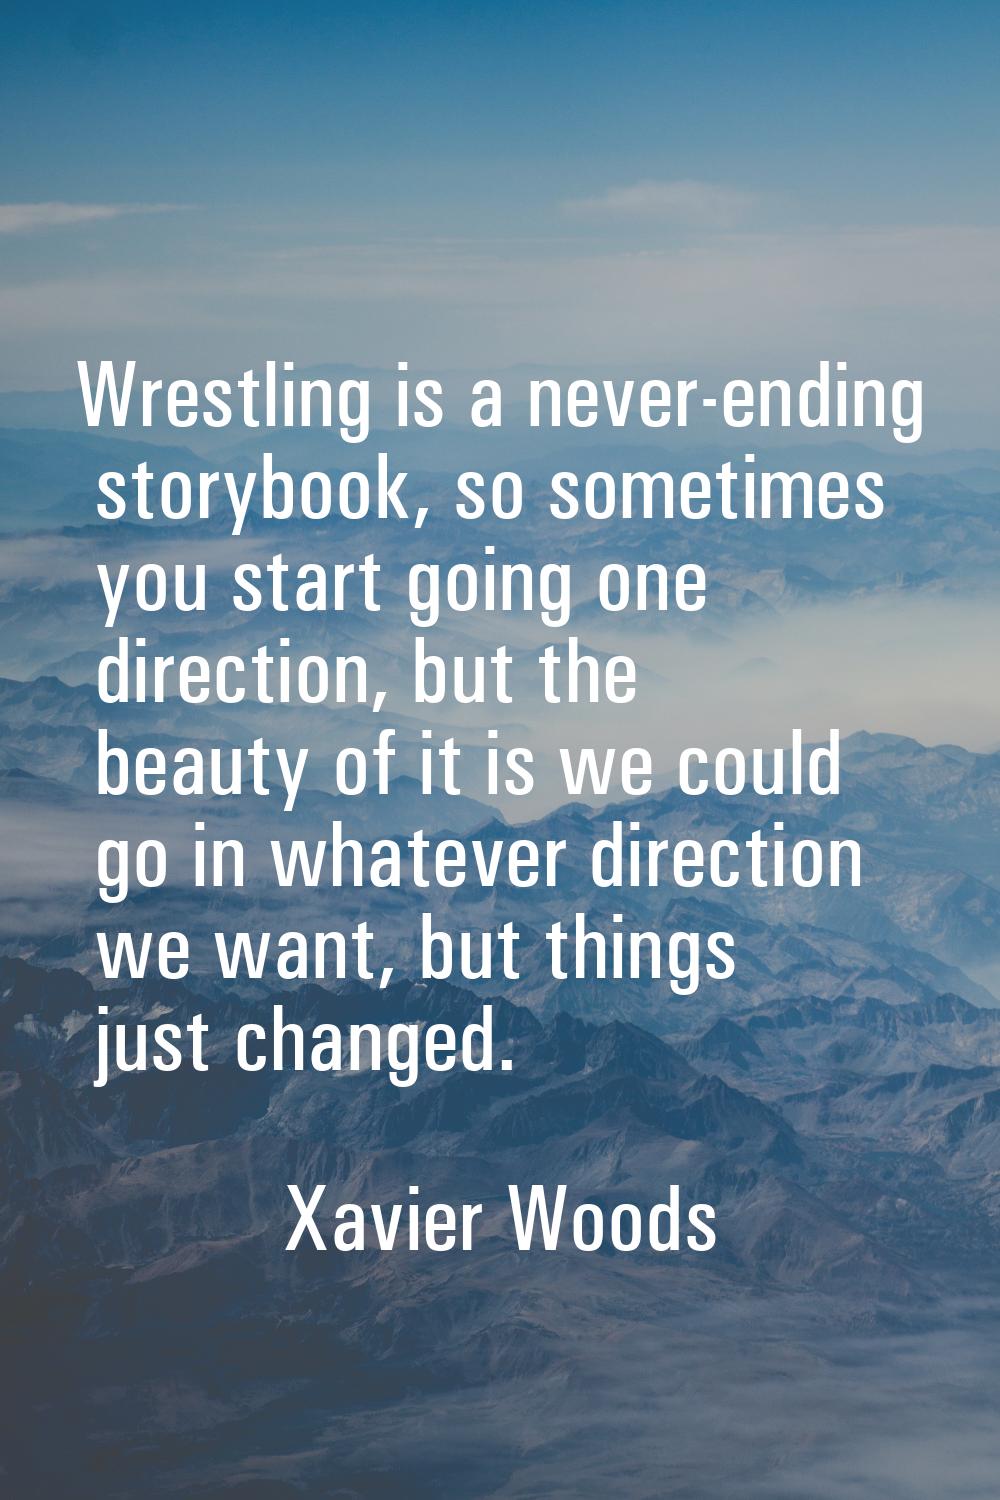 Wrestling is a never-ending storybook, so sometimes you start going one direction, but the beauty o